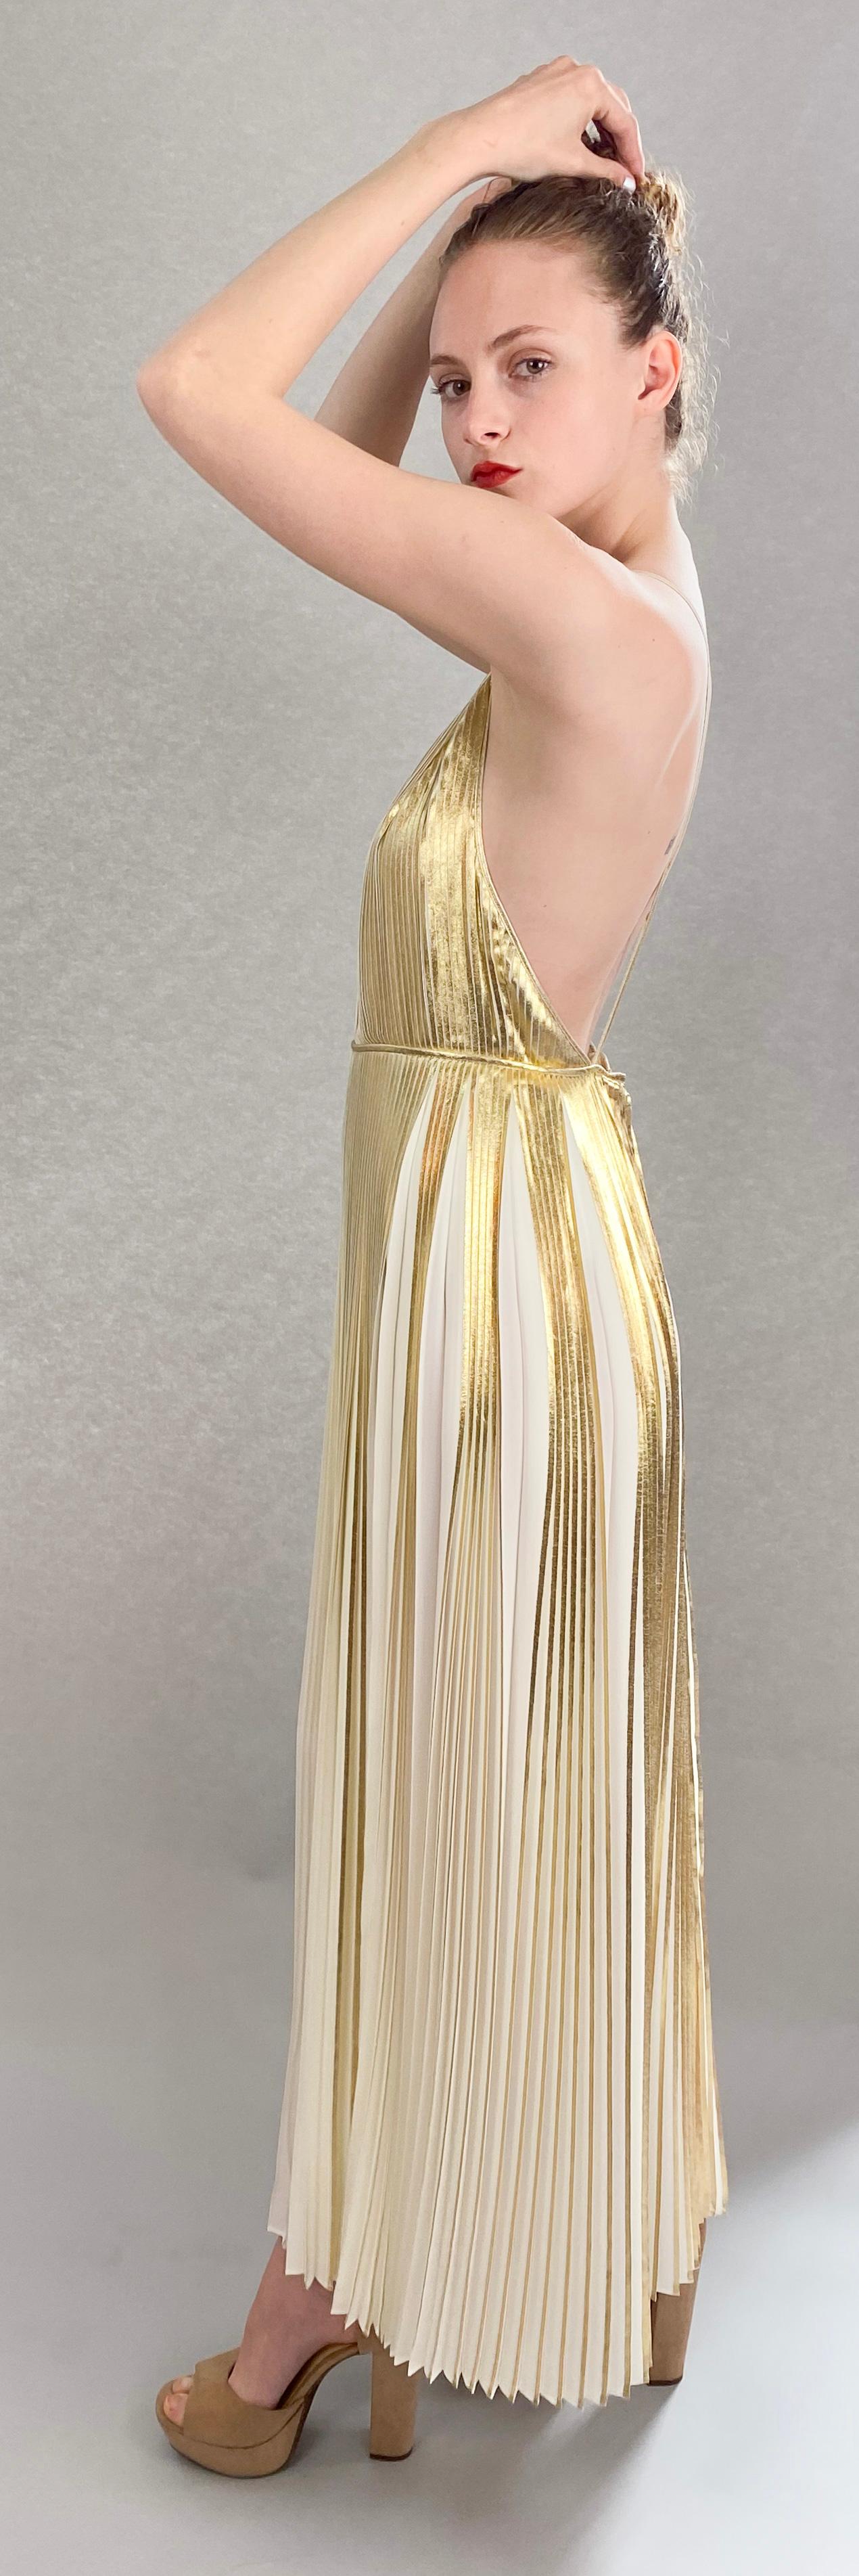 Discover a new level of luxury with our Valentino Gold Metallic Pleated Dress. Crafted from the finest lamé fabric, this dress features a sensual deep v neckline, accented by elegant under-bust piping. Elevate your style and make a statement with